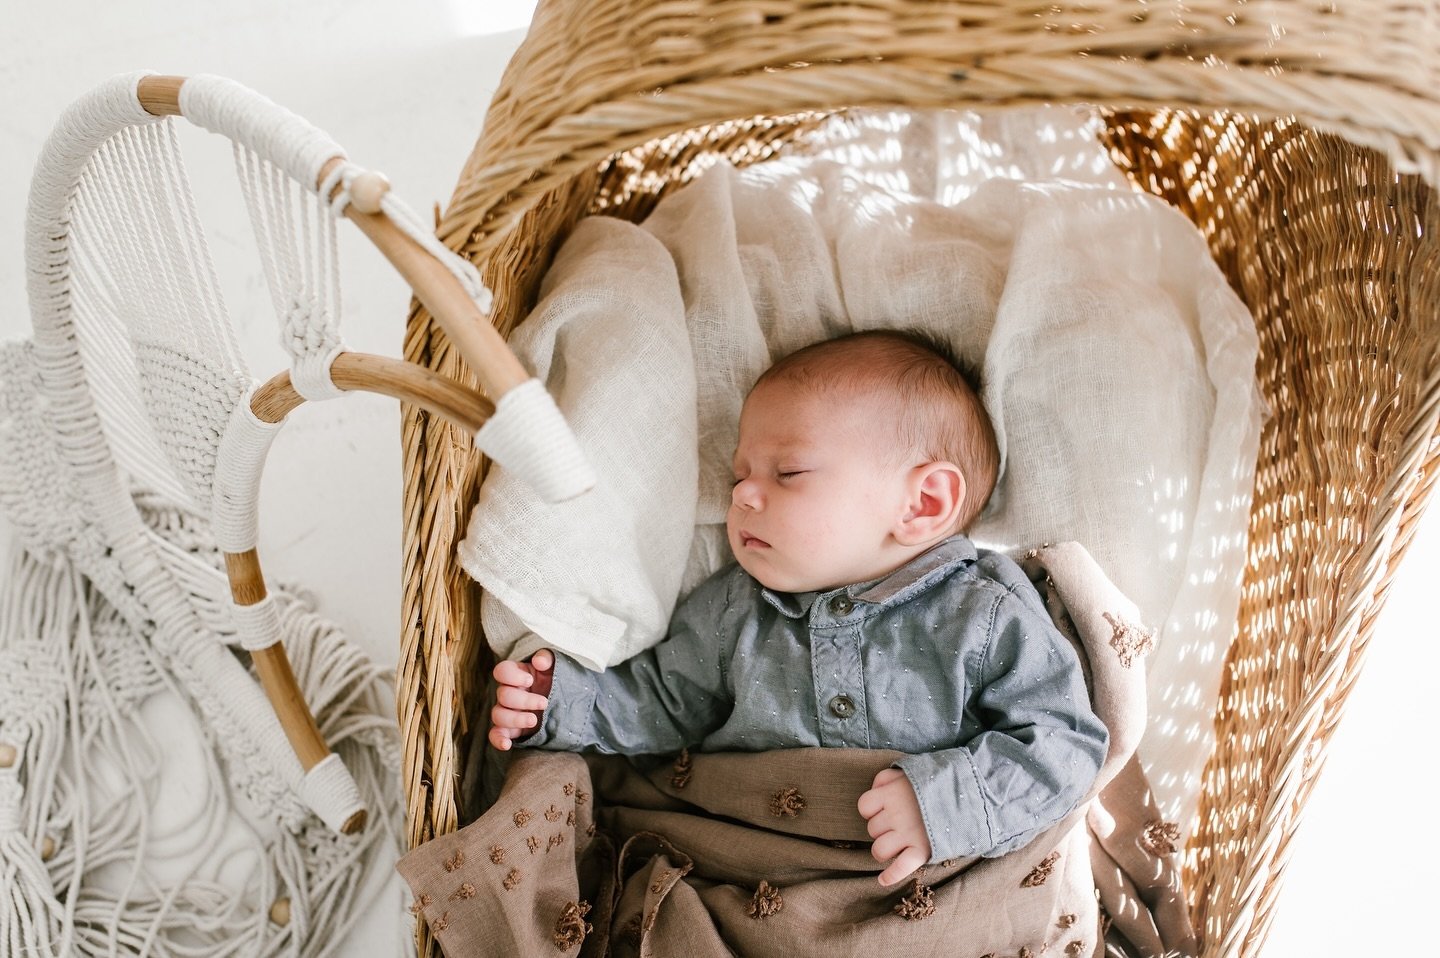 I just love a sweet little newborn profile photo! I think it's fun to document at any age so you can see how your babies grow up and how they look like siblings or other family members. 

Hope everyone has a great weekend!